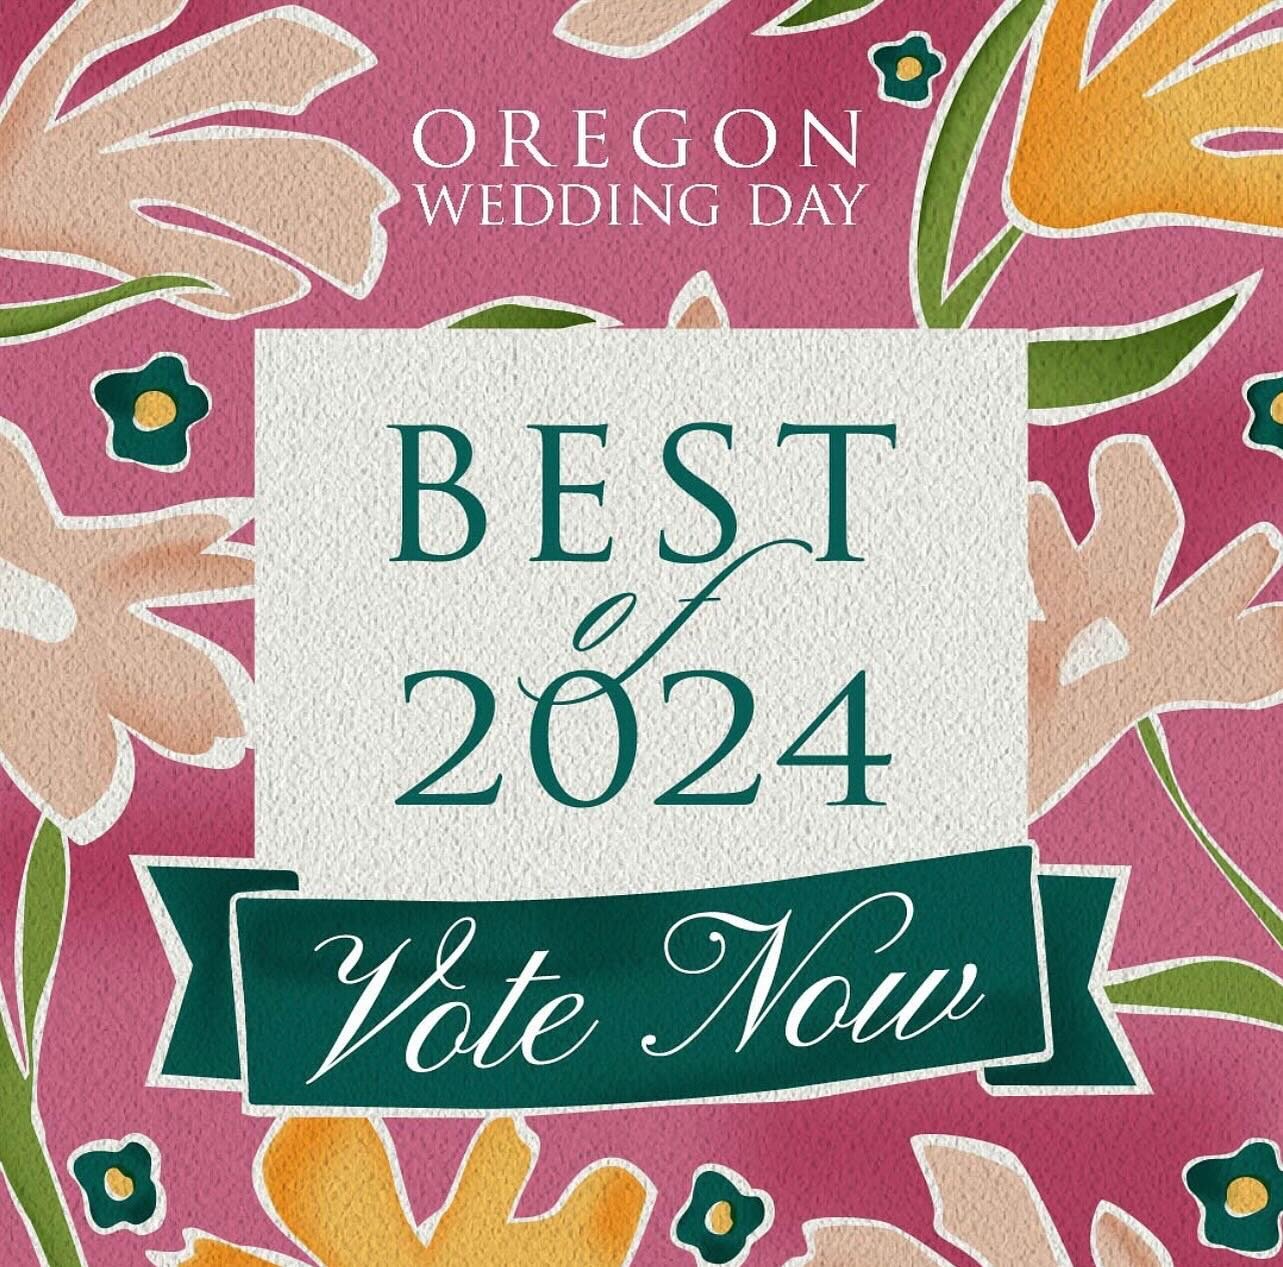 Please make sure to plug us in for Photo Booth this year- we may be new but we&rsquo;re here! And we&rsquo;re ready to parrrrrrty! 

#oregonweddingdaybestof2024